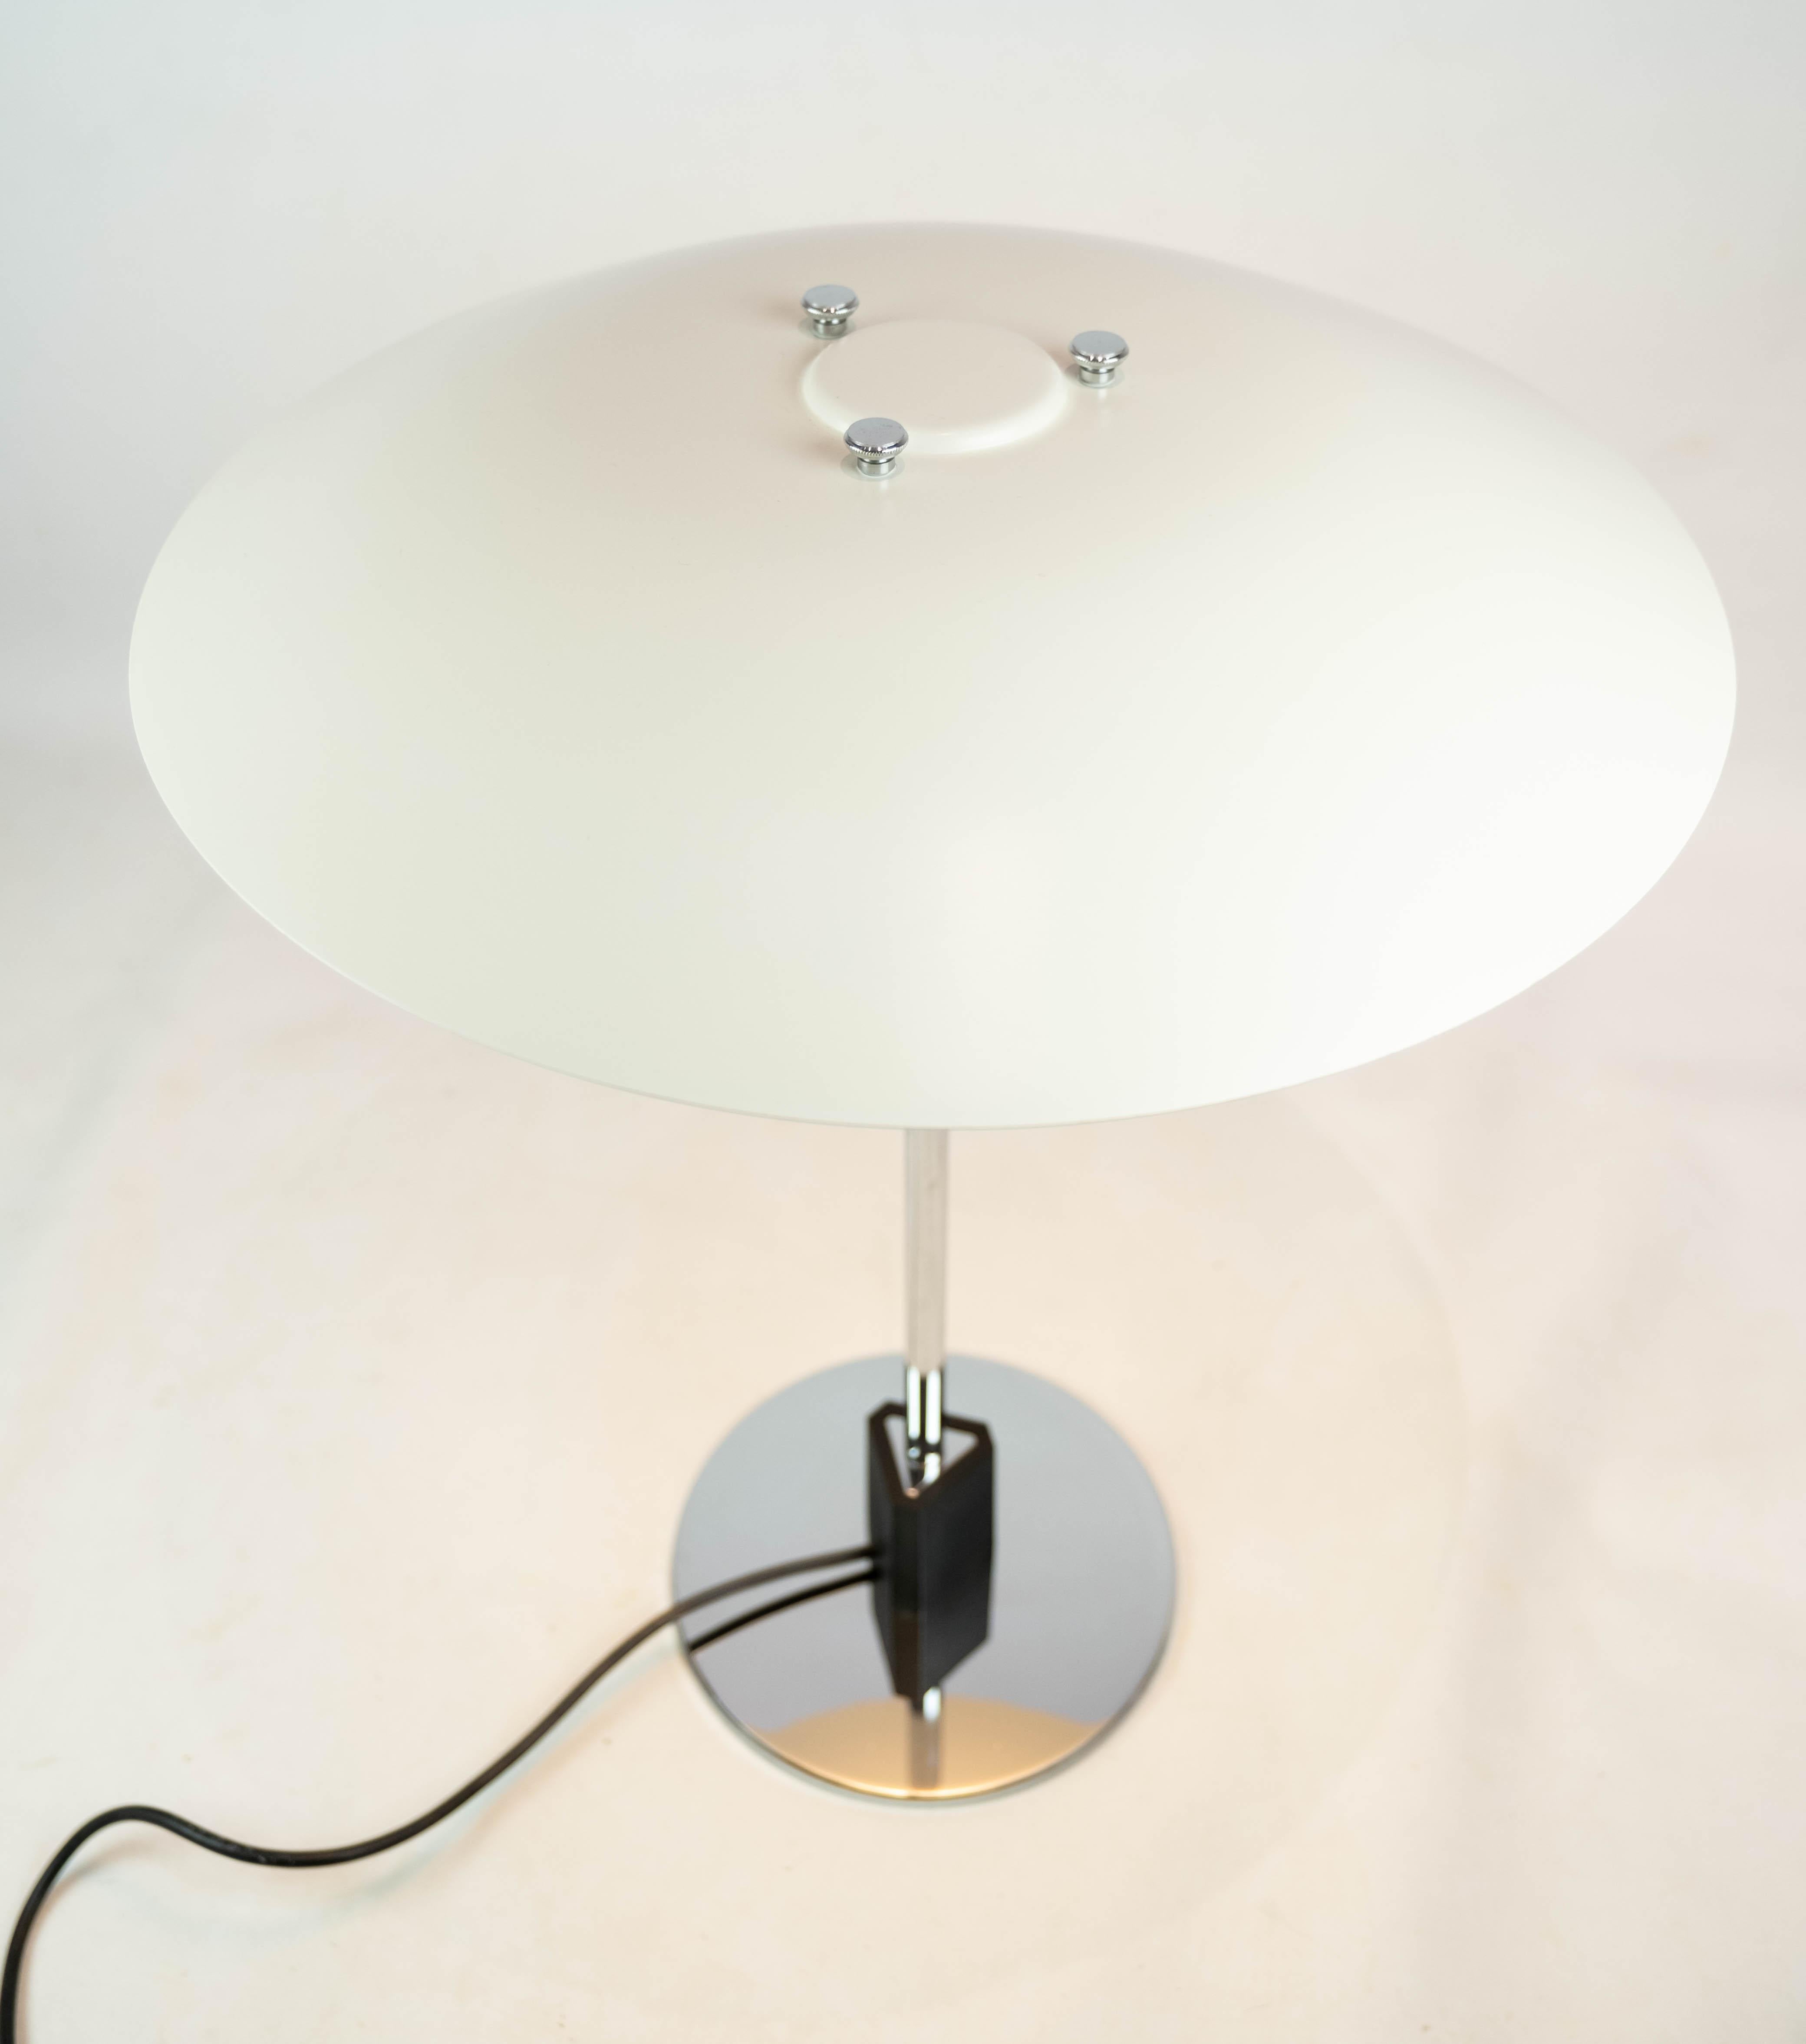 PH 4/3 table lamp designed by Poul Henningsen and manufactured by Louis Poulsen. The lamp is with white laqcuered metal shades.

This product will be inspected thoroughly at our professional workshop by our educated employees, who assure the product